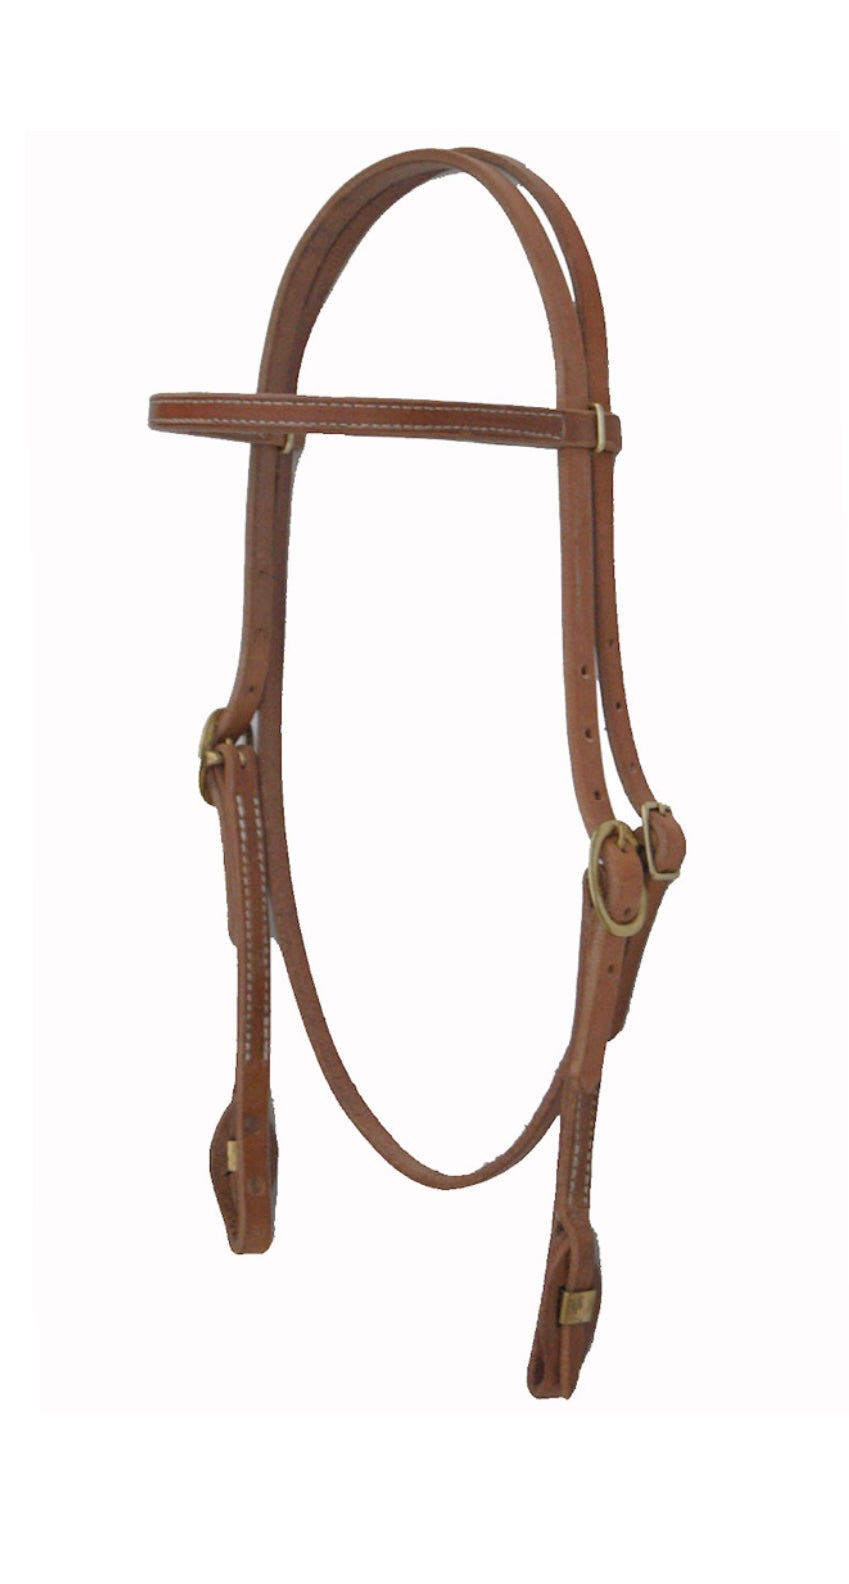 CST Harness Leather Browband Headstall w/ Brass Hardware